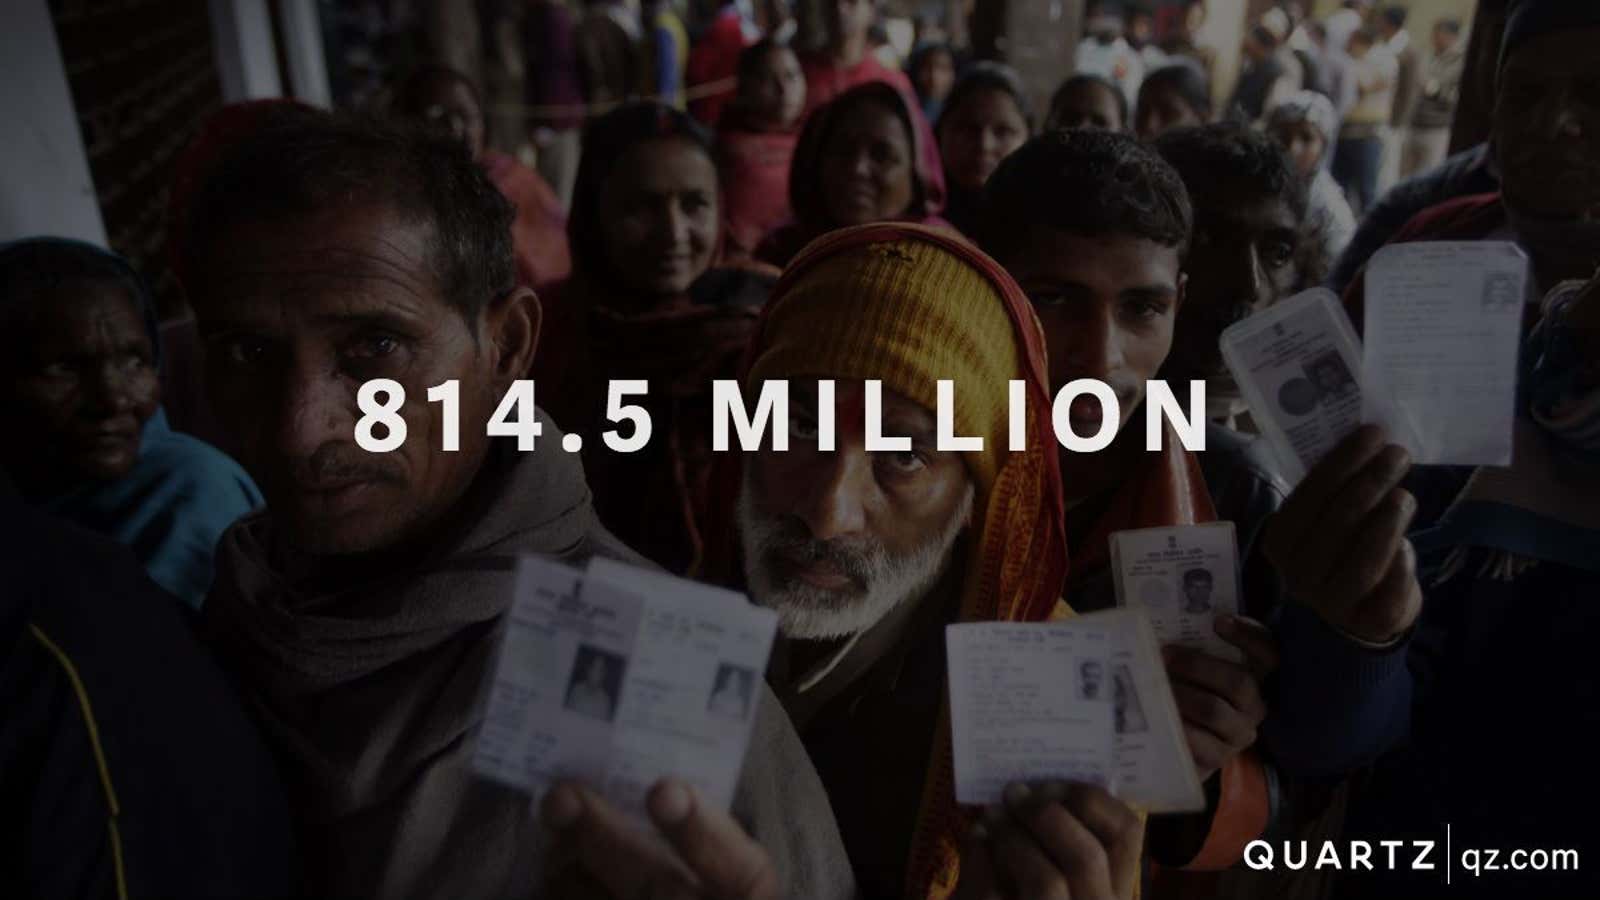 The number of eligible Indian voters is more than twice the entire US population